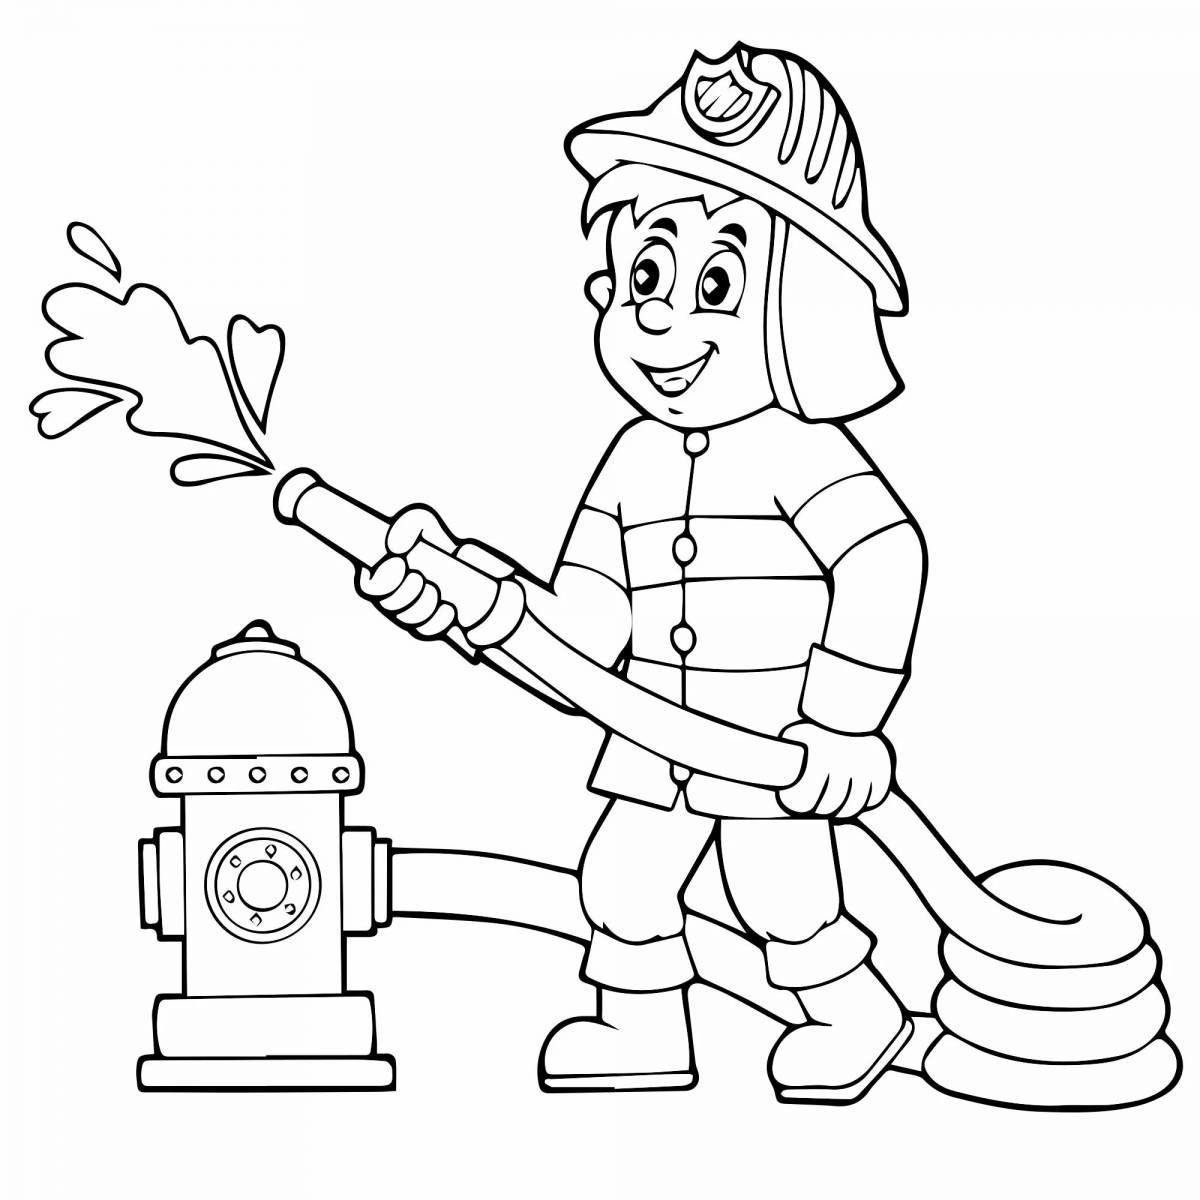 Glowing fire shield coloring page